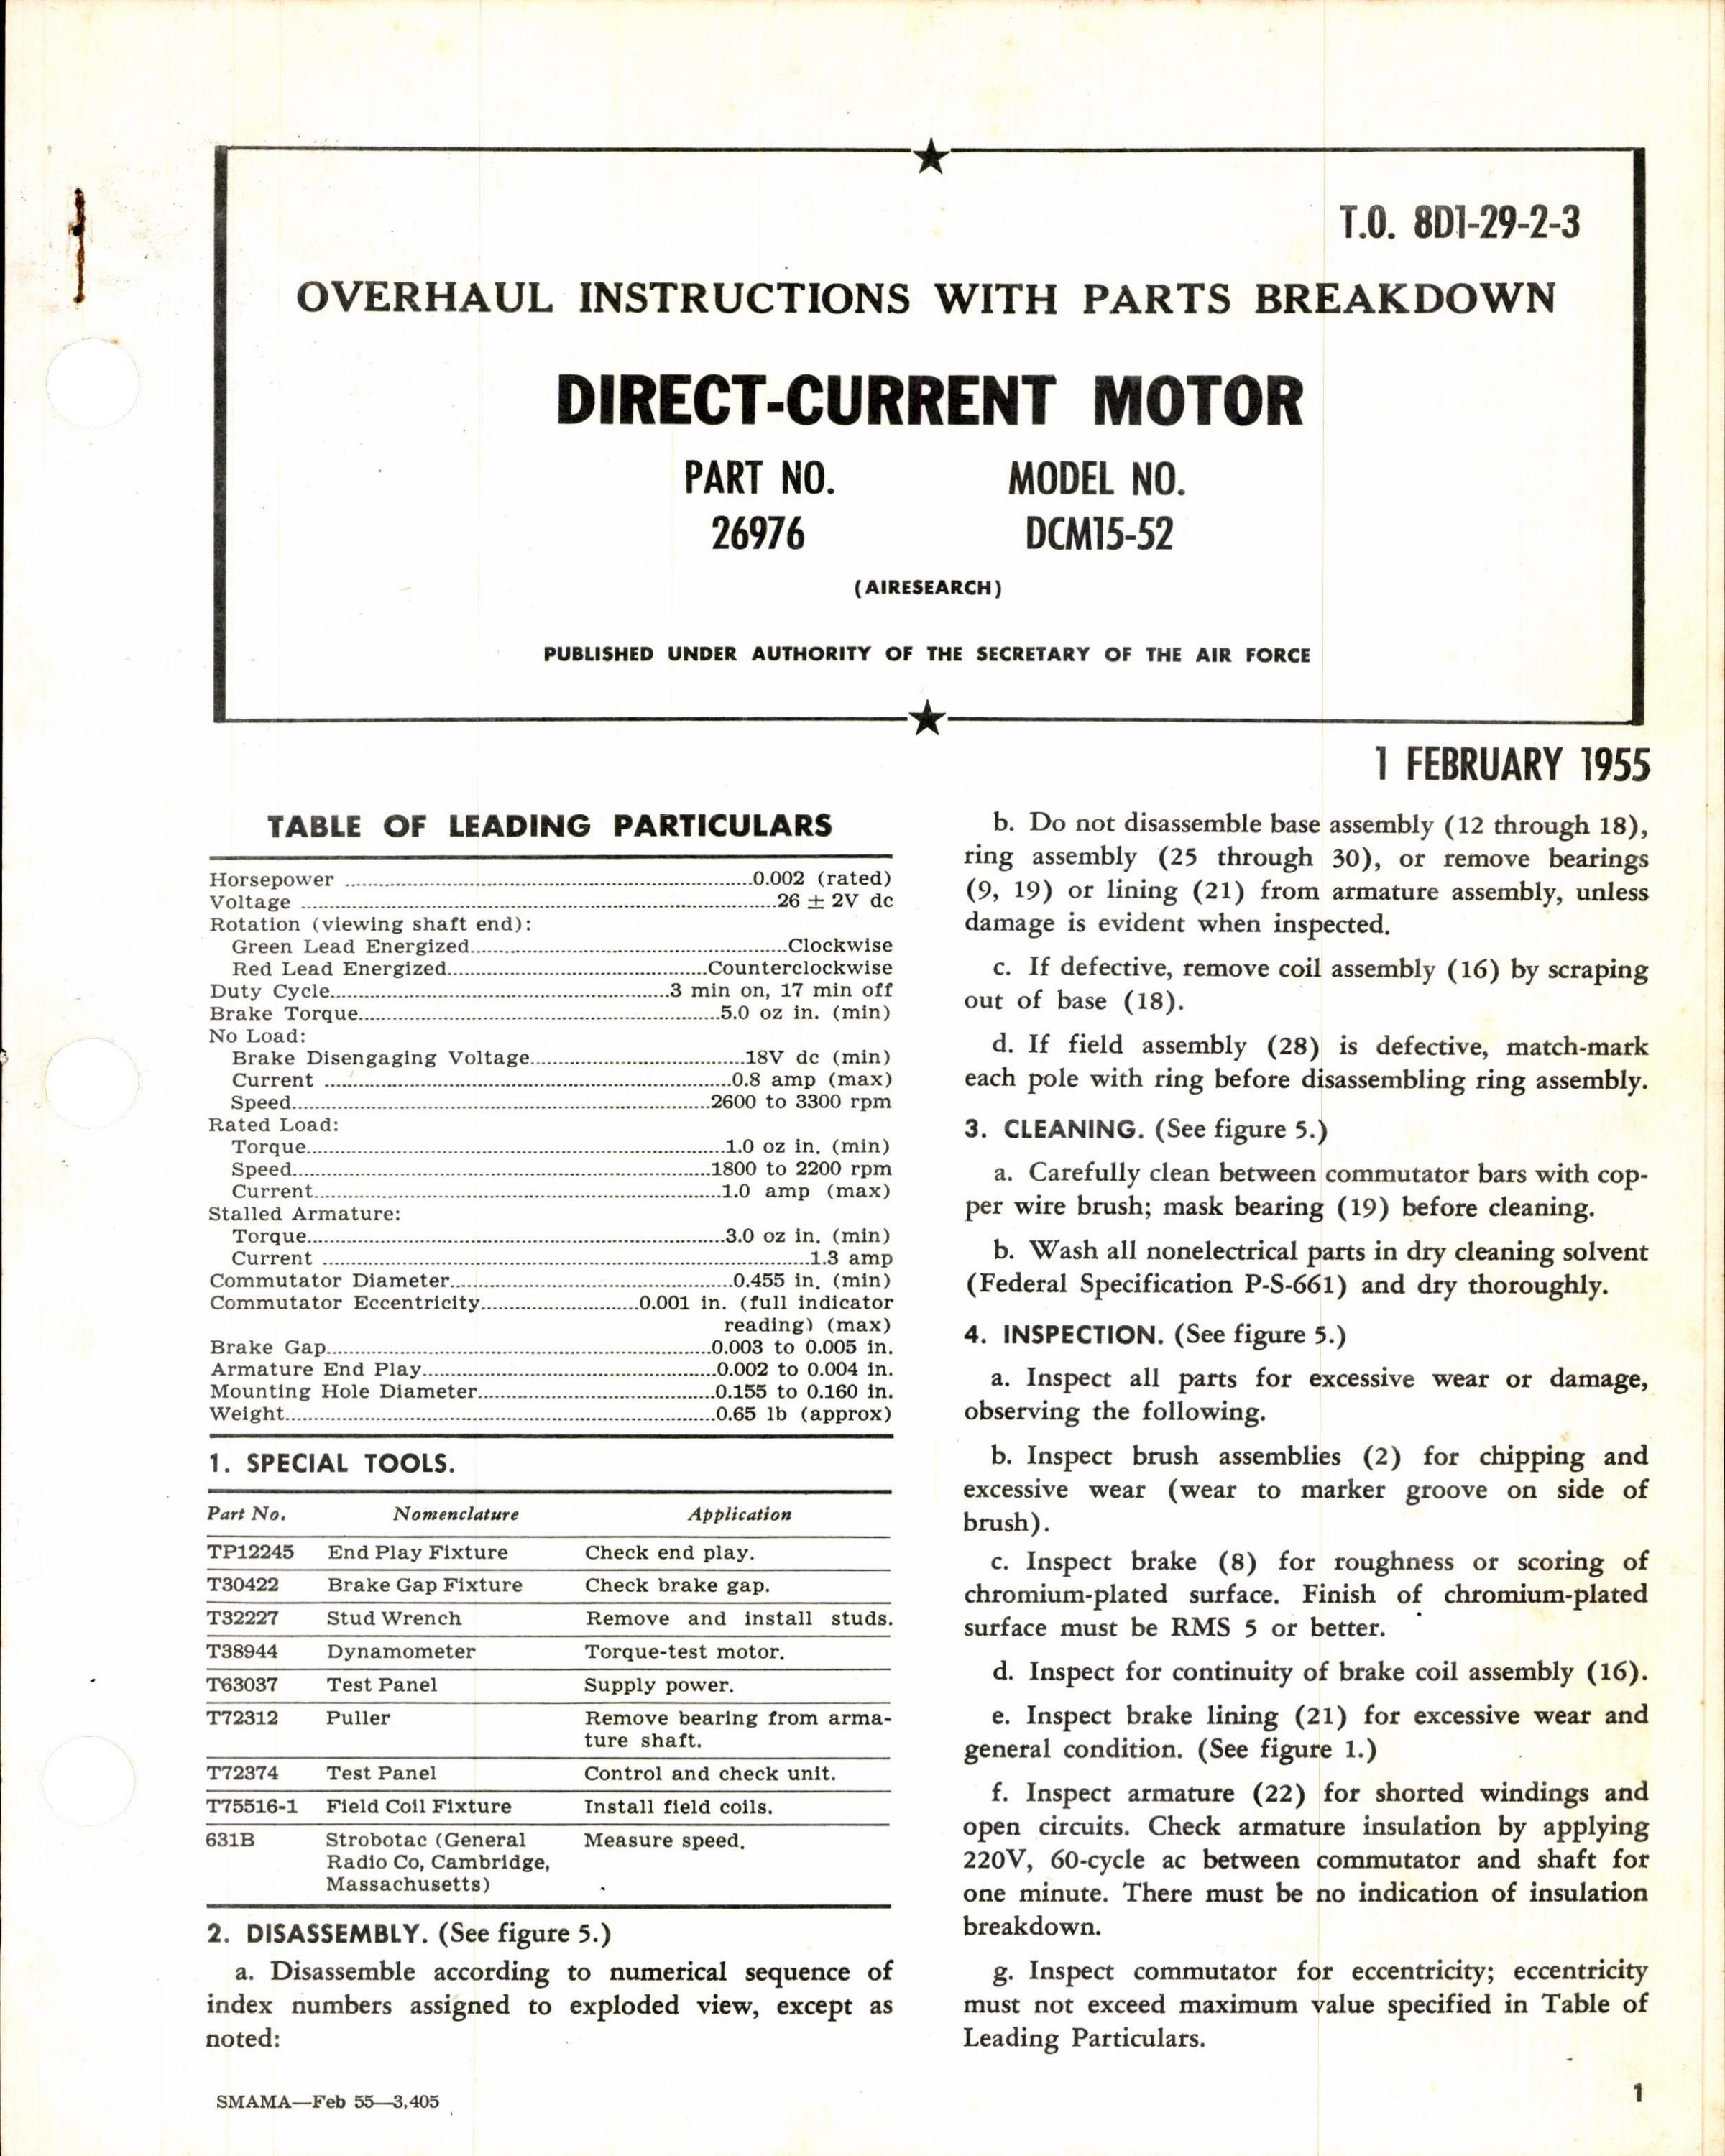 Sample page 1 from AirCorps Library document: Overhaul Instructions with Parts Breakdown for Direct Current Motor Model DCM15-52, Part No 26976